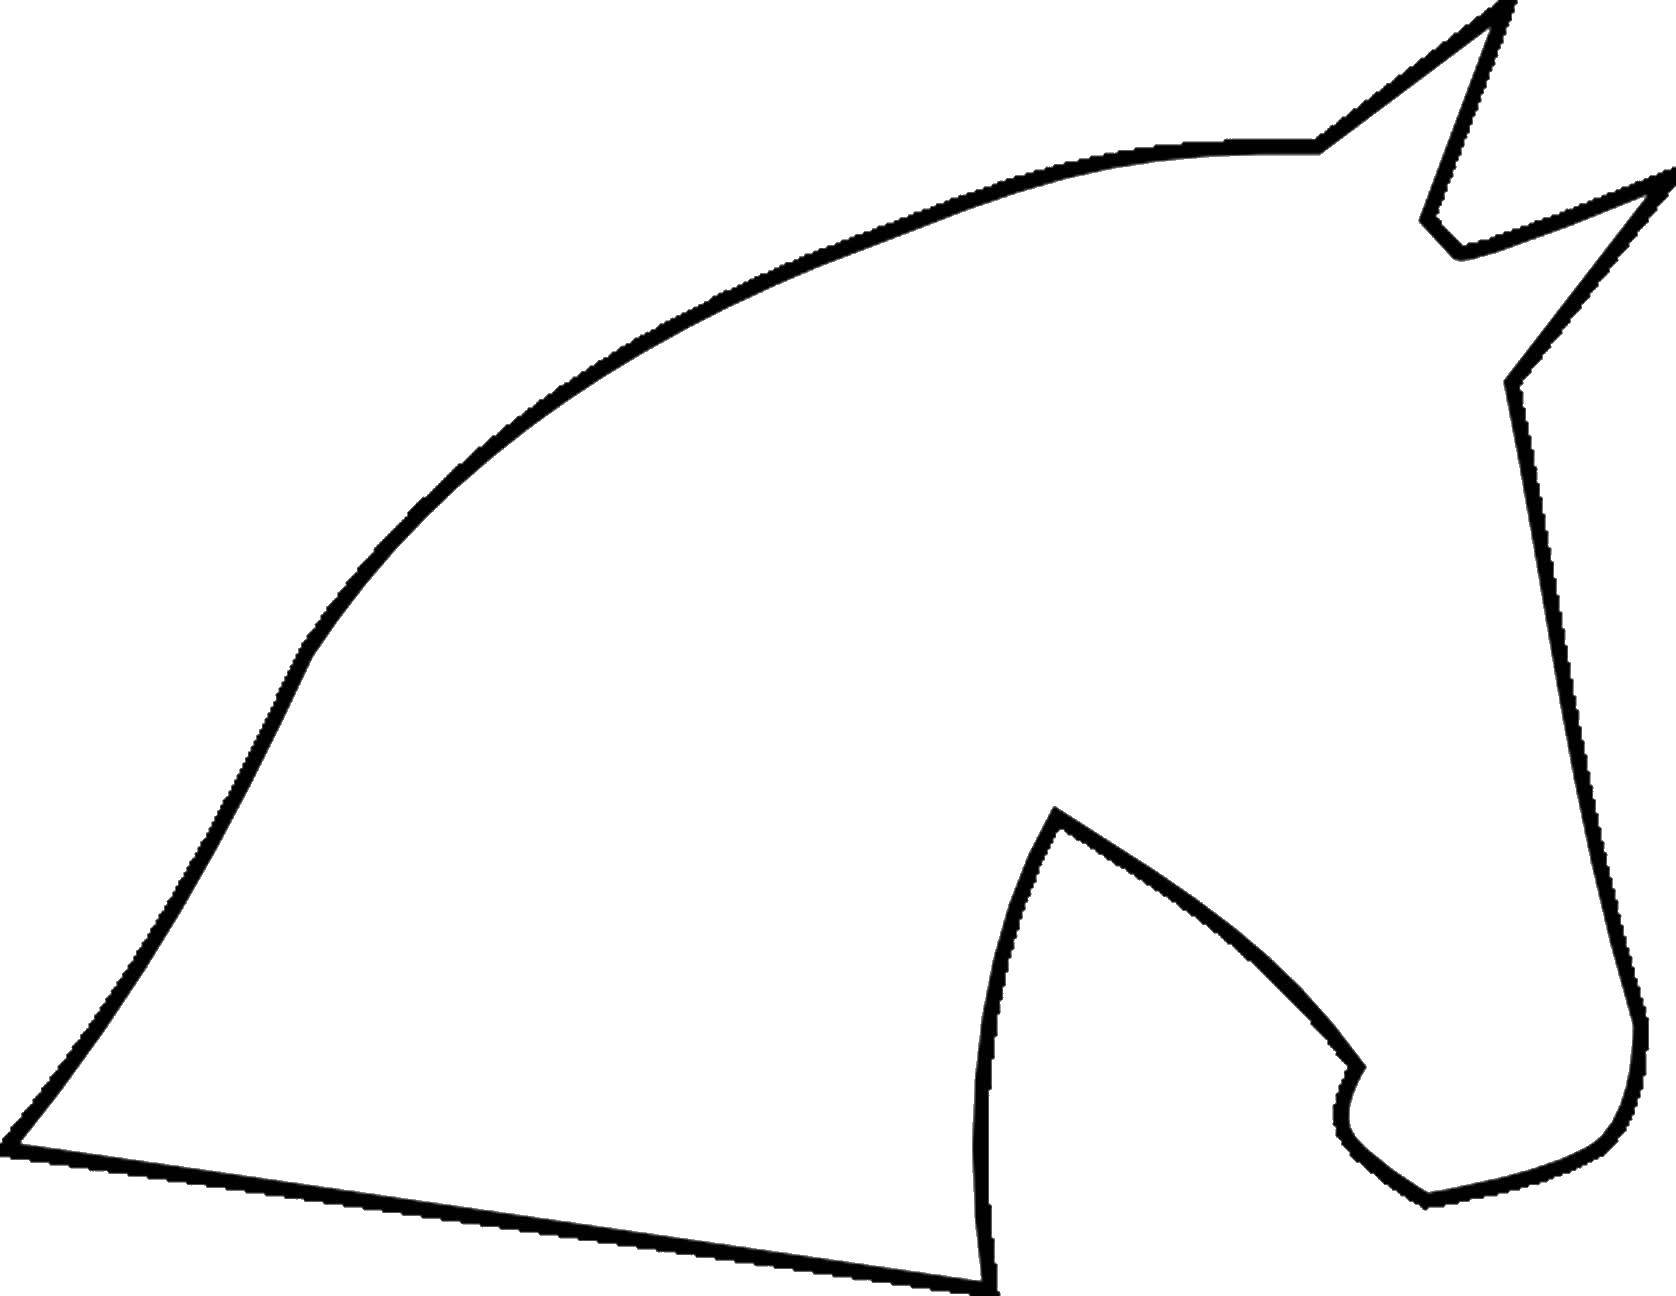 Coloring Horse head. Category the contours of the horse. Tags:  horses, the contours.